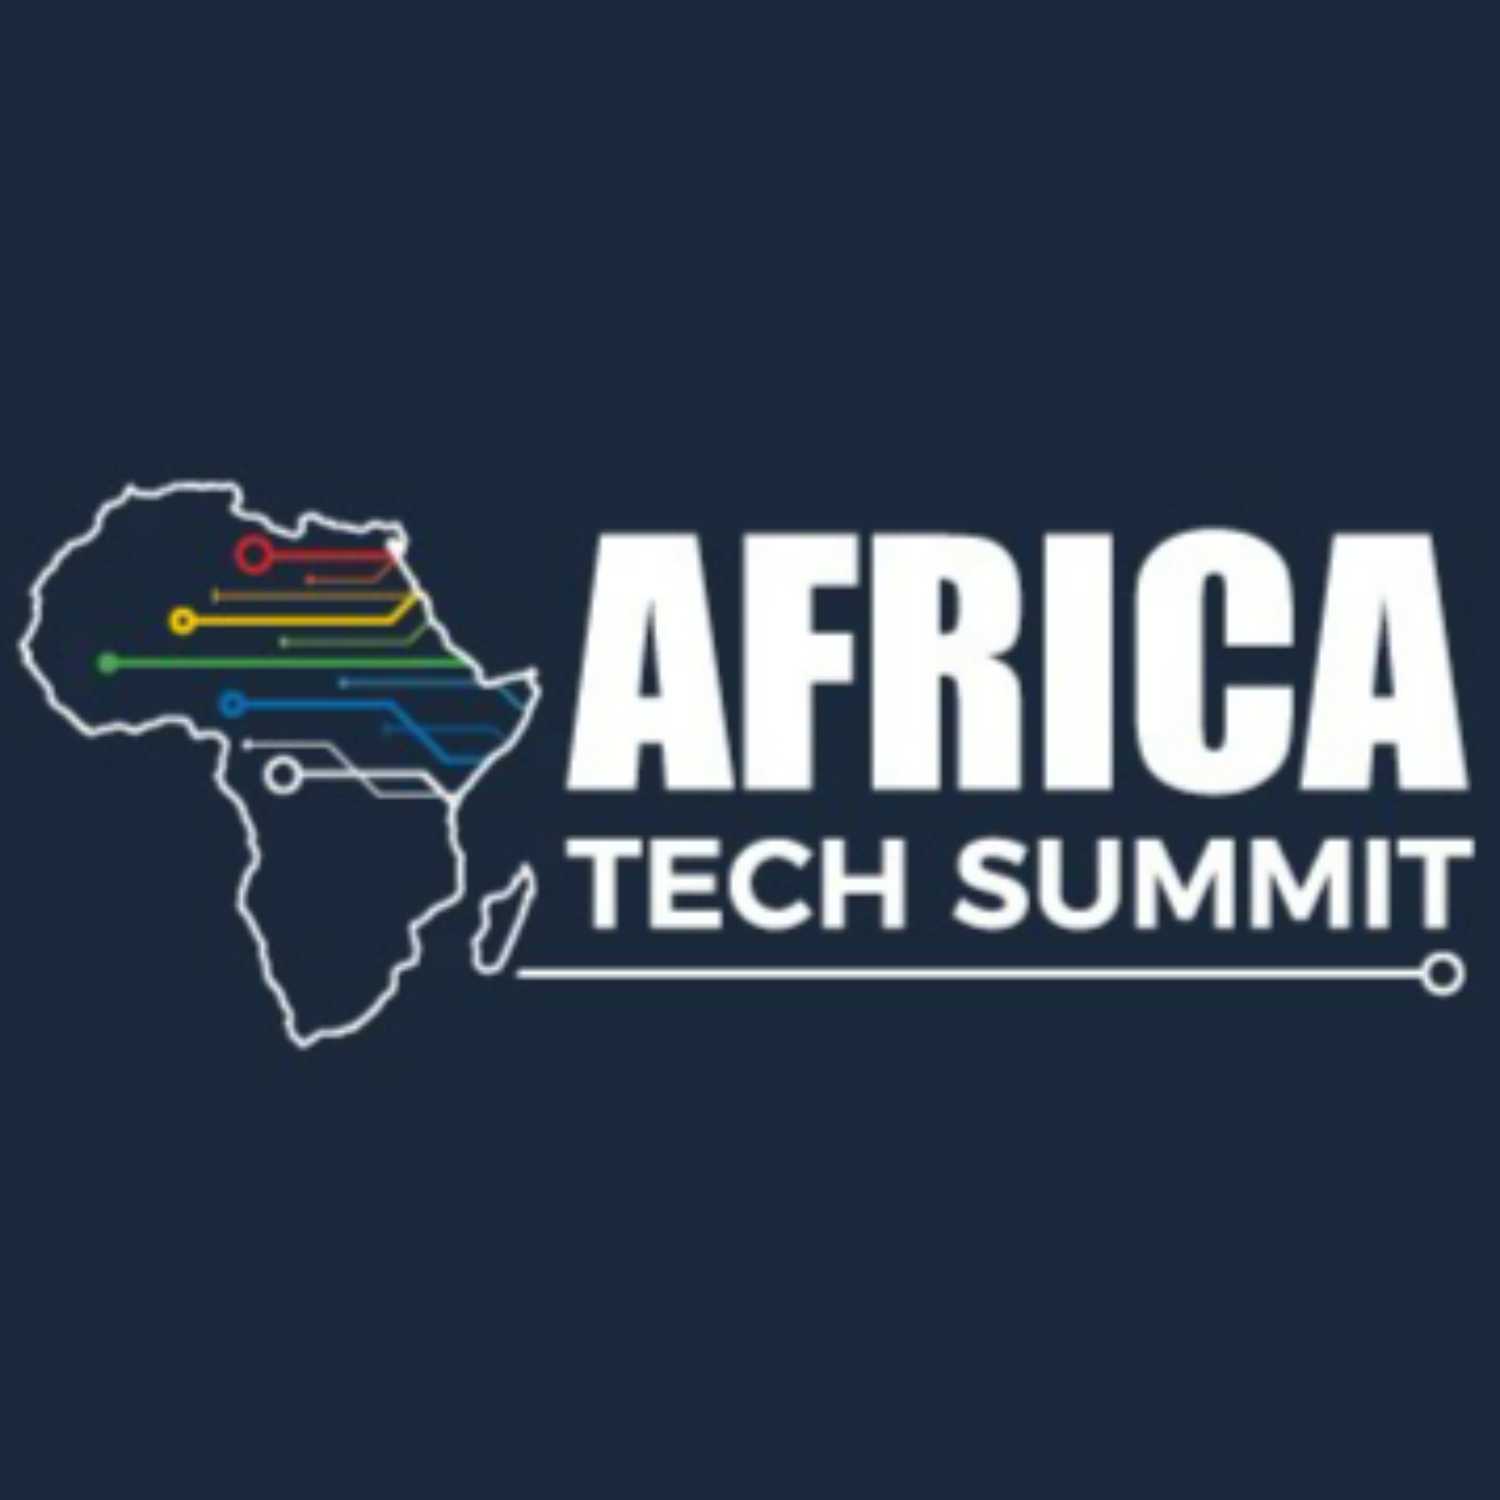 EP15: The Business of Payments - recorded live at Africa Tech Summit London